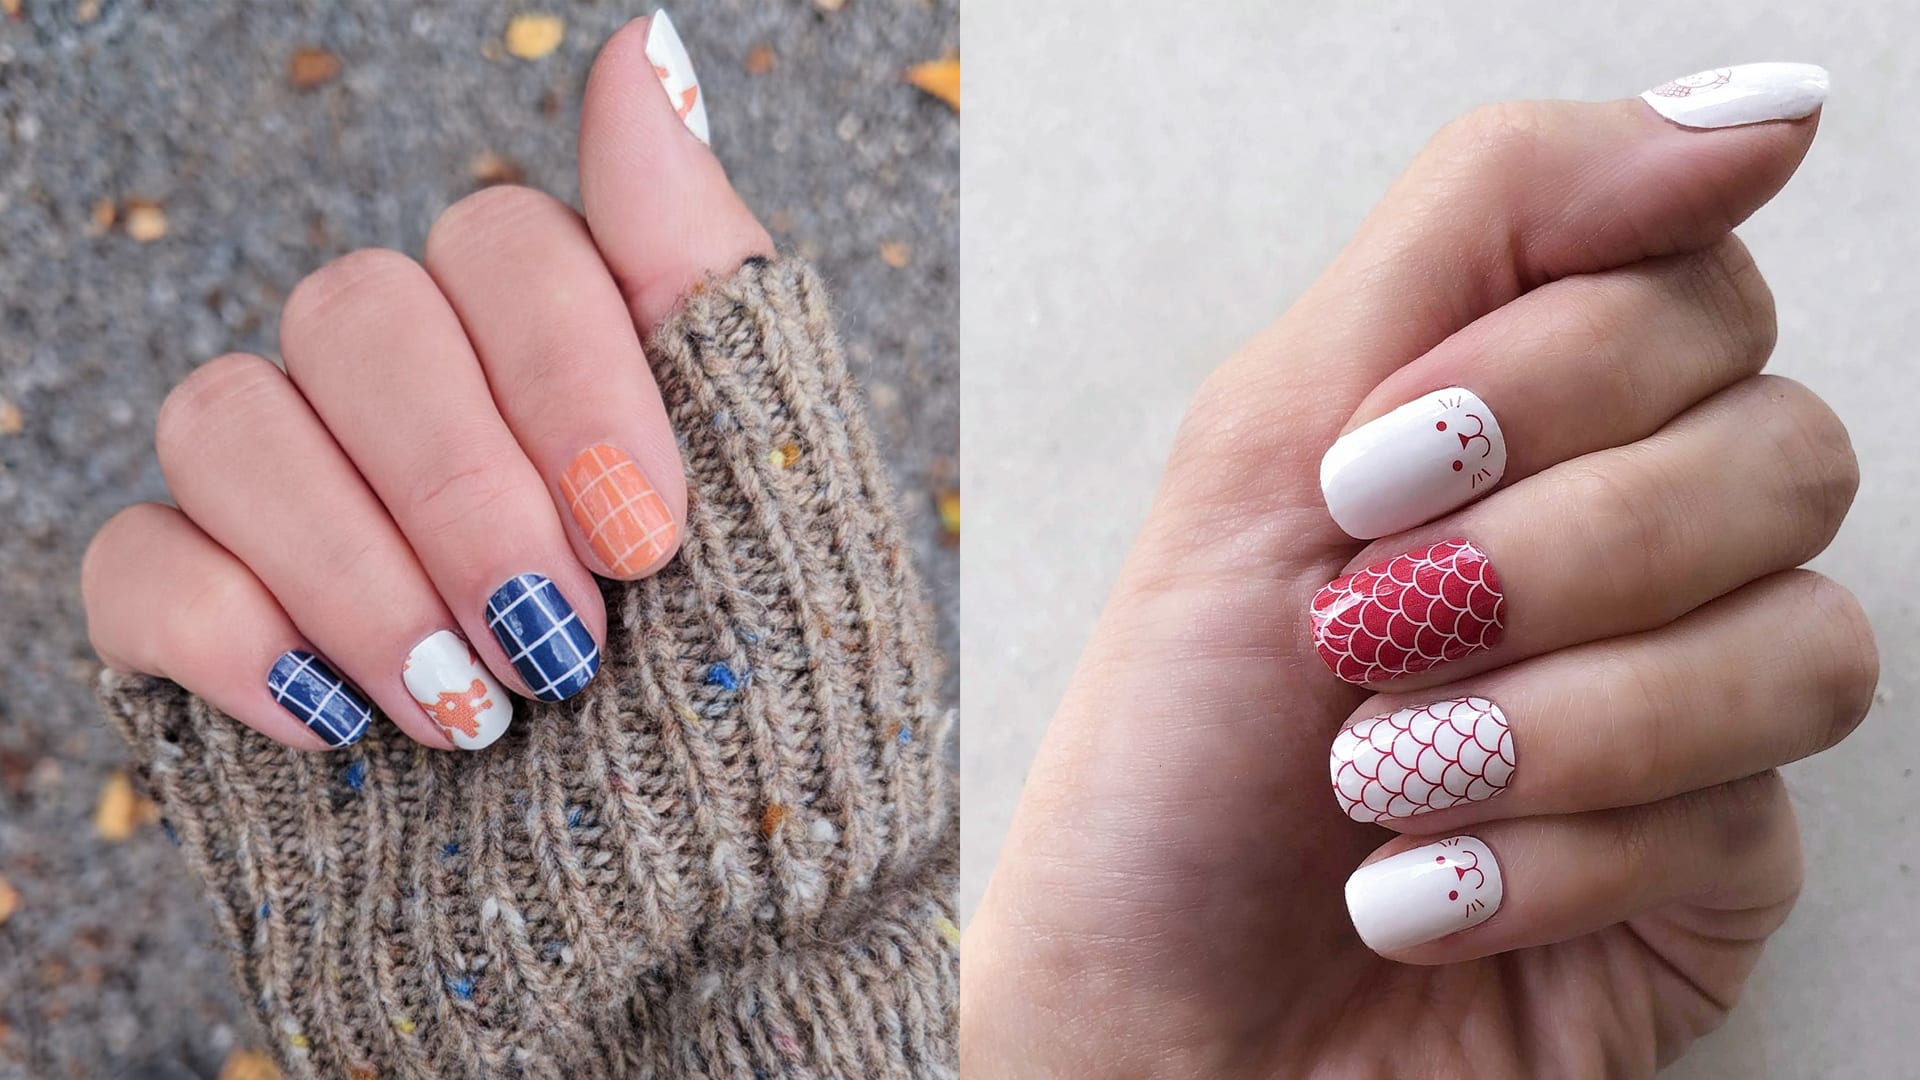 8 Patriotic Nail Designs To Wear On National Day 2020